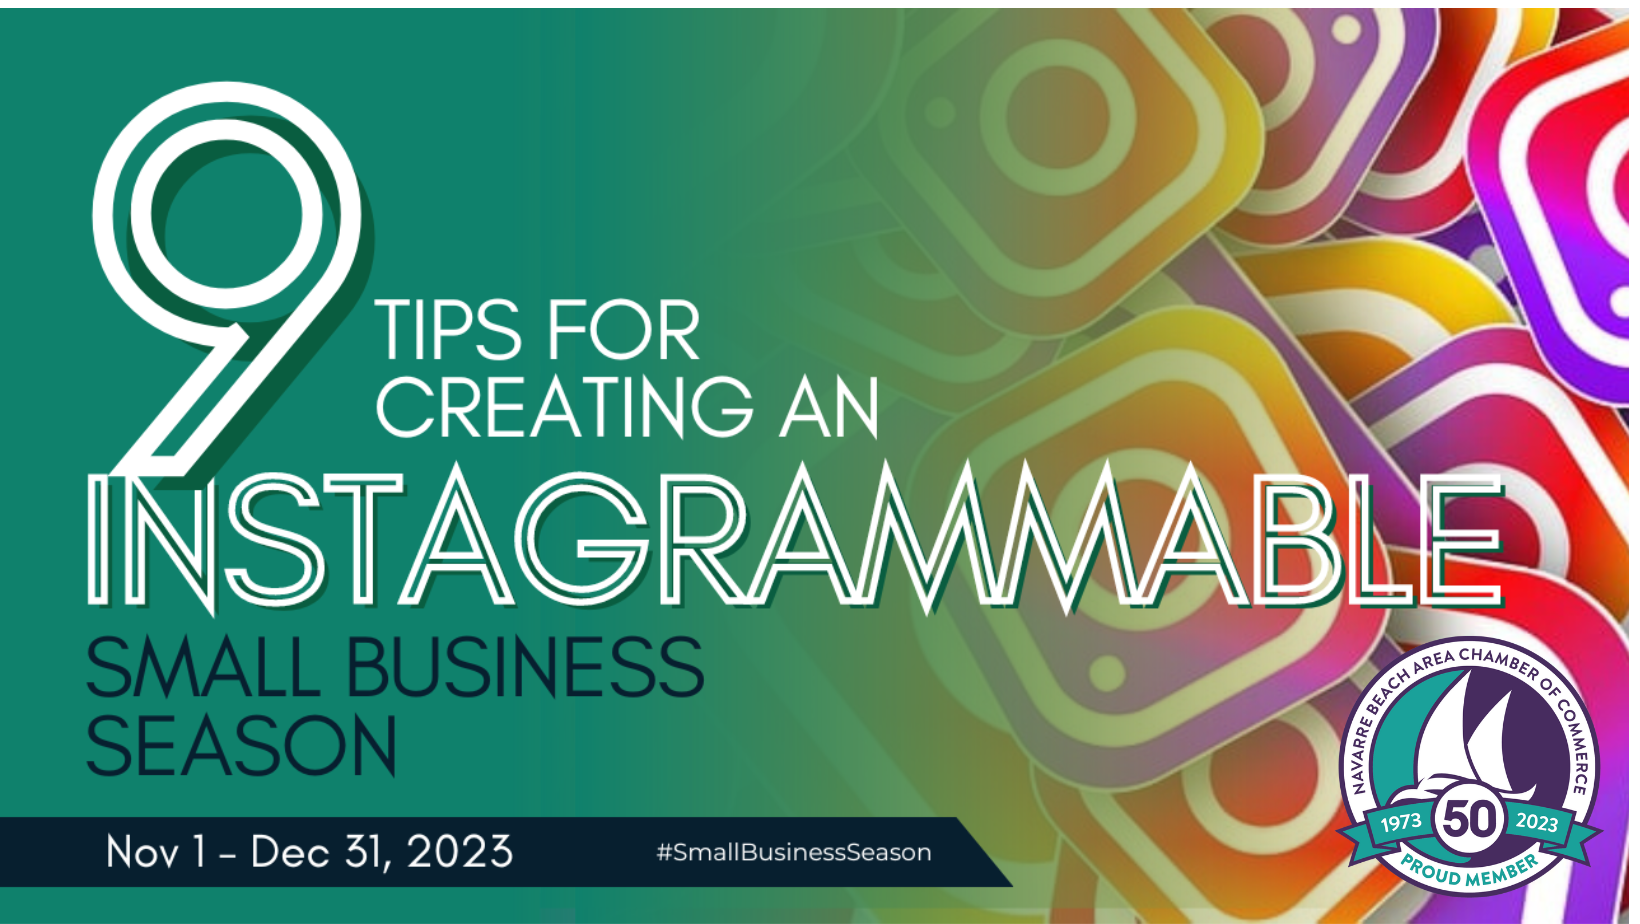 Image for 9 Tips for Creating an Instagrammable Small Business Season